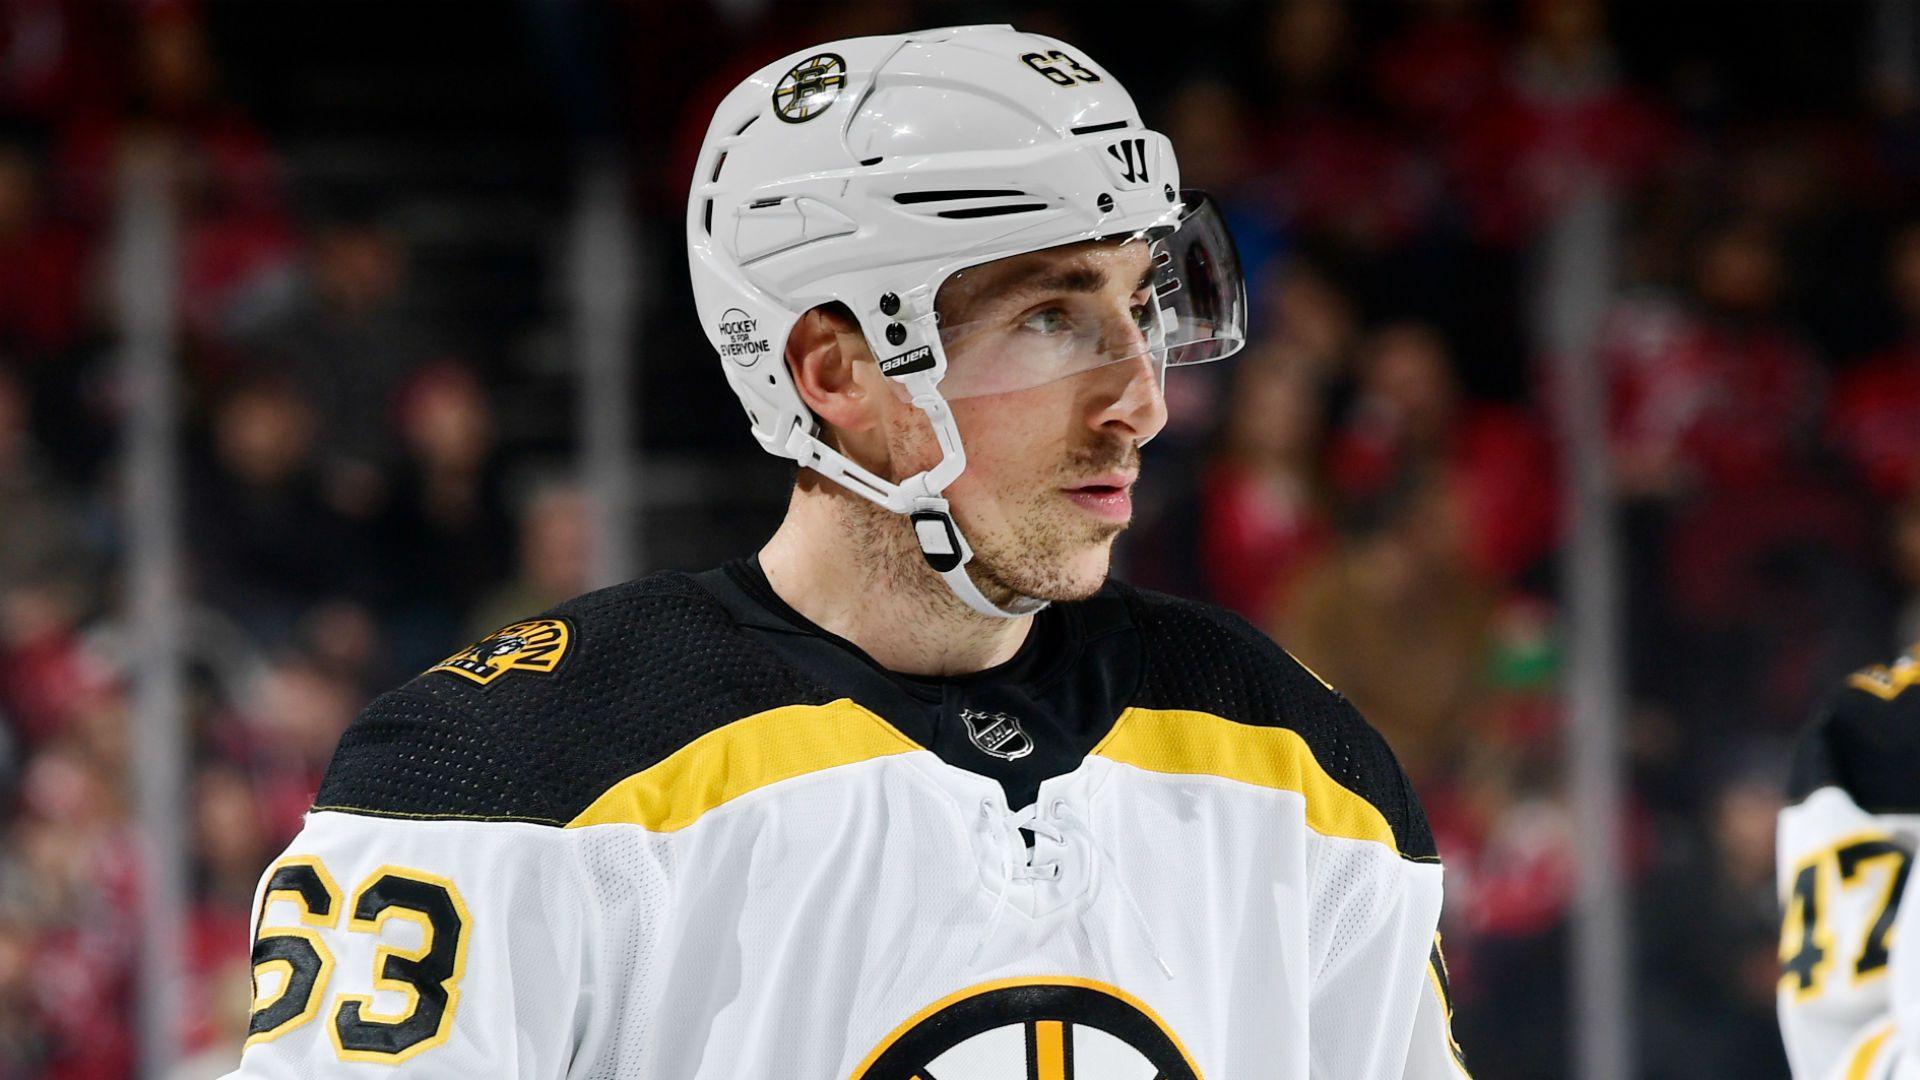 Brad Marchand in hot water again after reckless clothesline takes